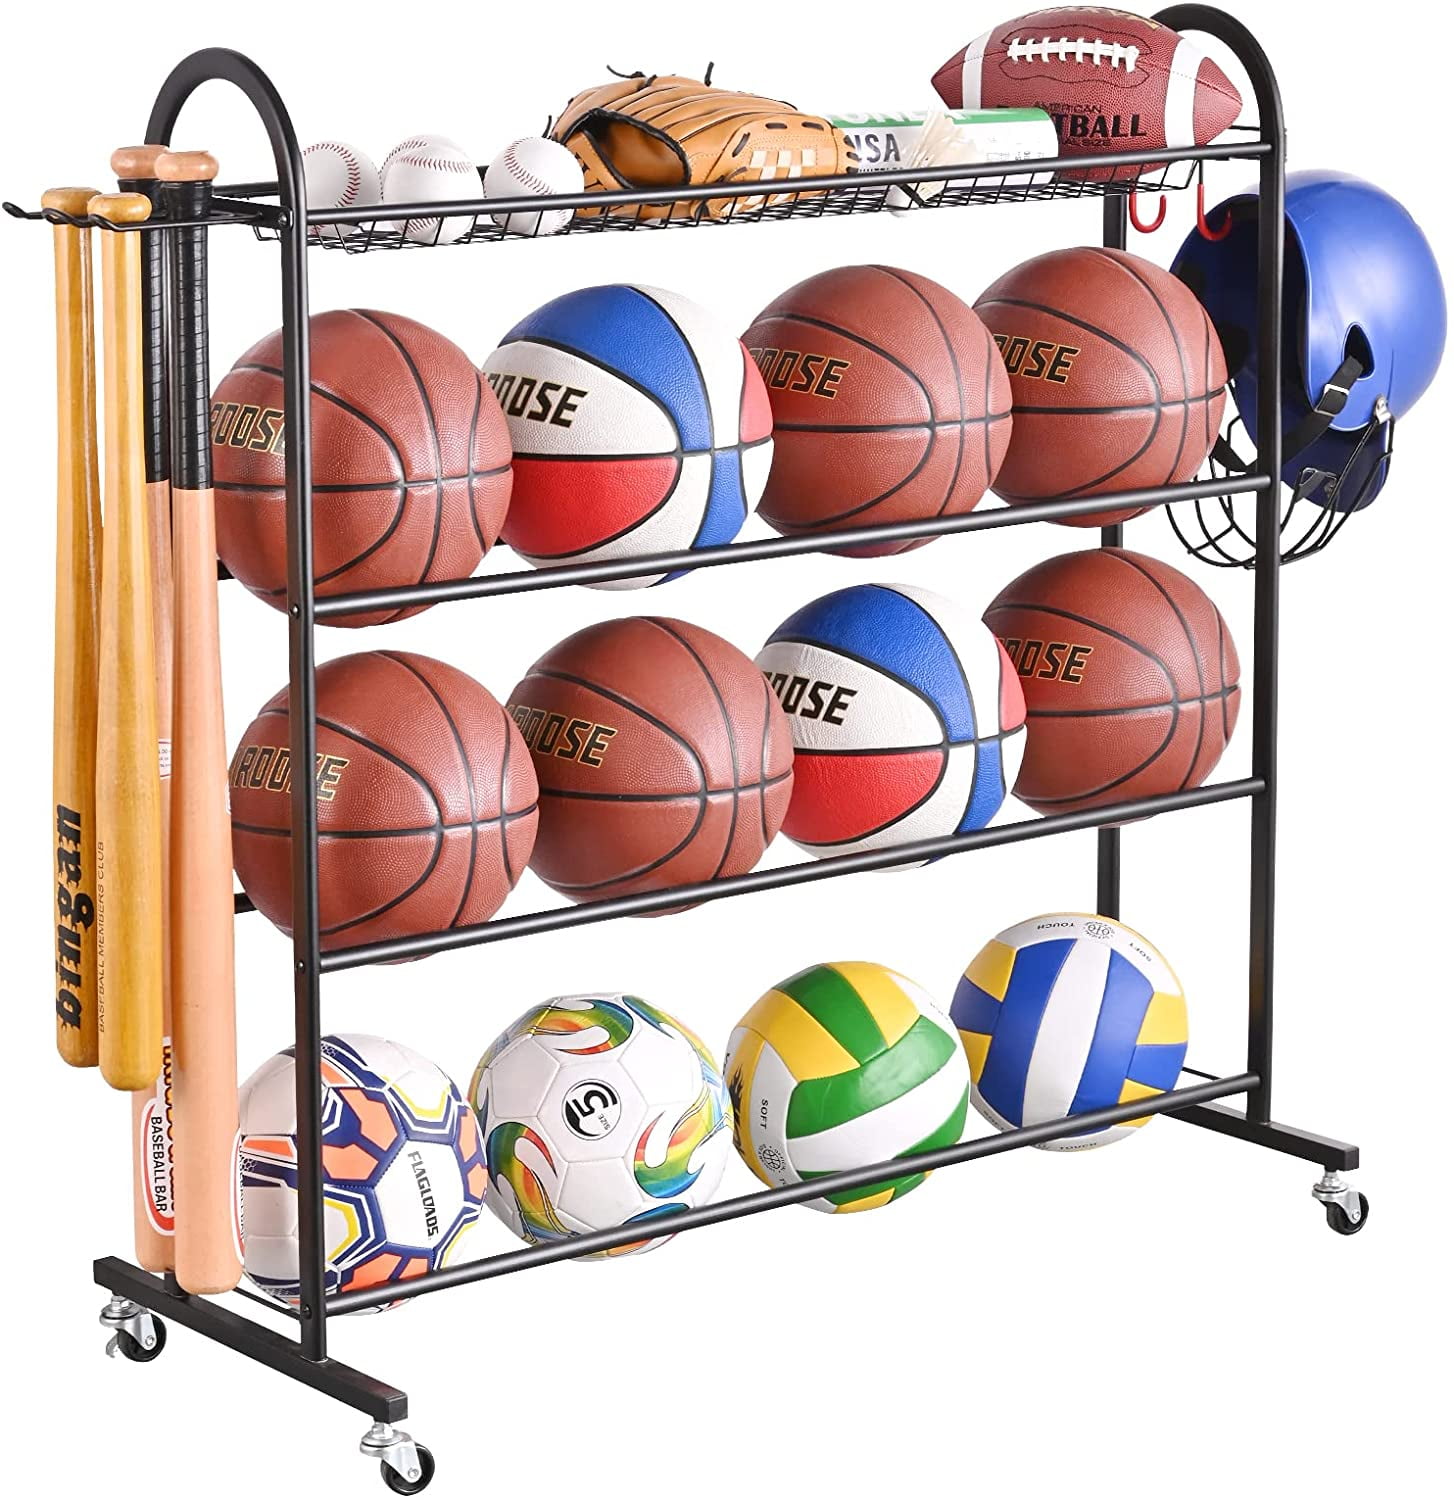 Metal Ball Holder Rack Wall Mount Space Saving Universal Display Storage Rack for Basketball Volleyball Rugby Soccer Ball not Included 